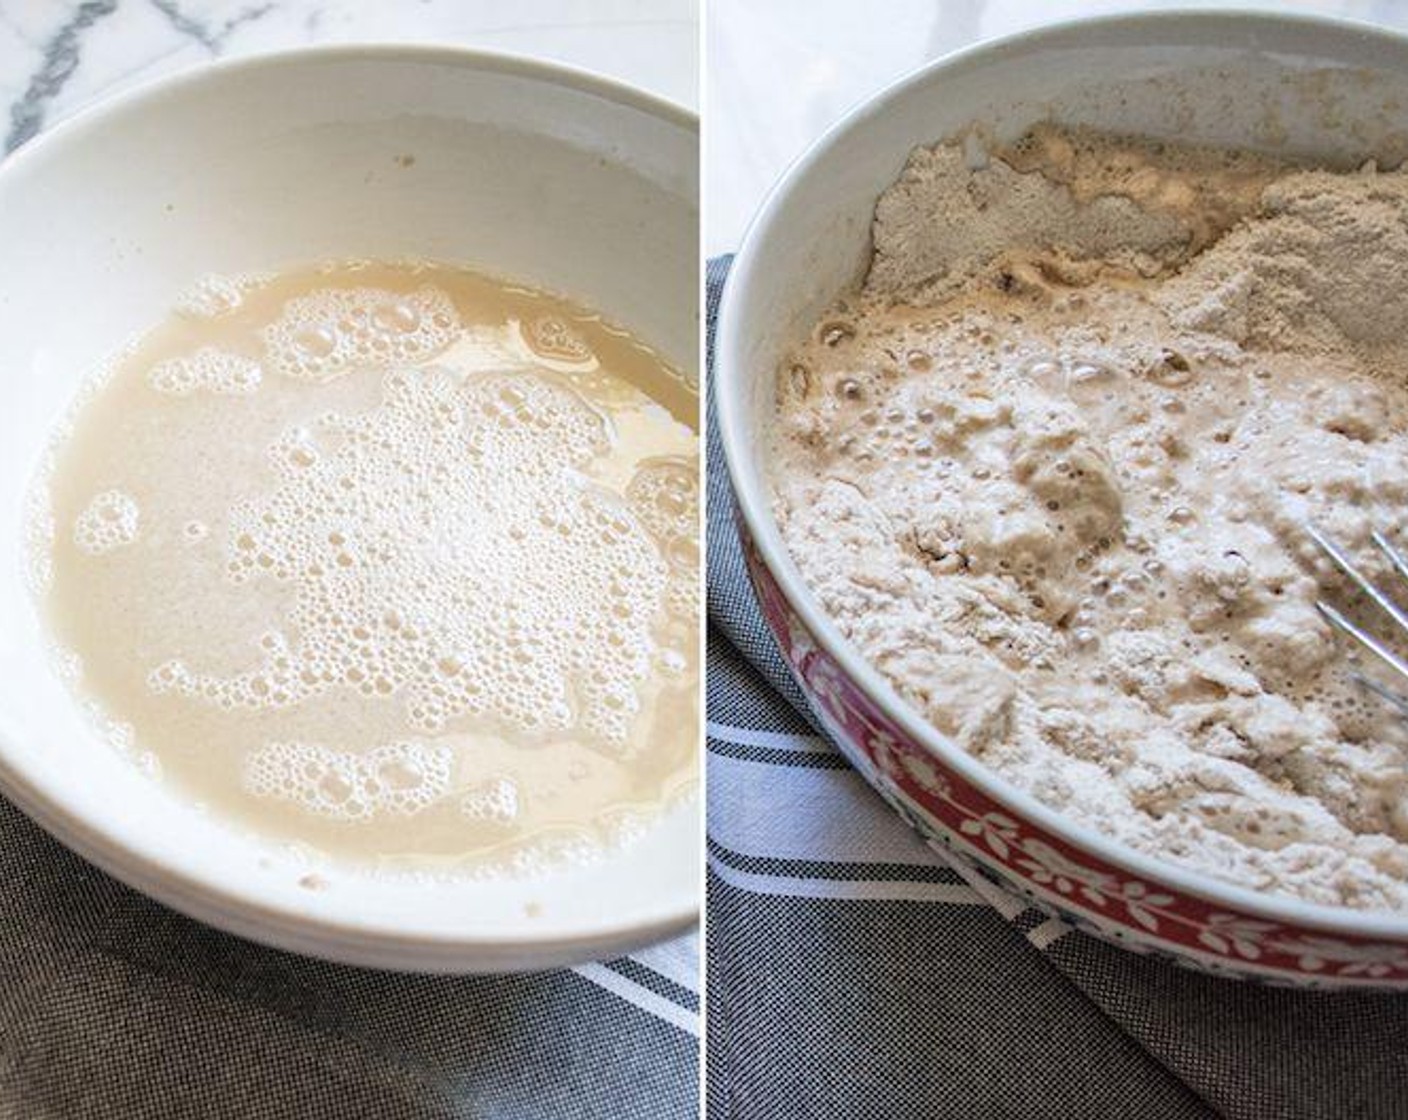 step 1 Add Water (1 1/2 cups), Rapid-Rise Yeast (1 1/2 Tbsp) and Raw Honey (1/2 Tbsp) to medium bowl. Whisk together until honey and yeast have fully dissolved, then let sit for 5 minutes or until foam forms on top.